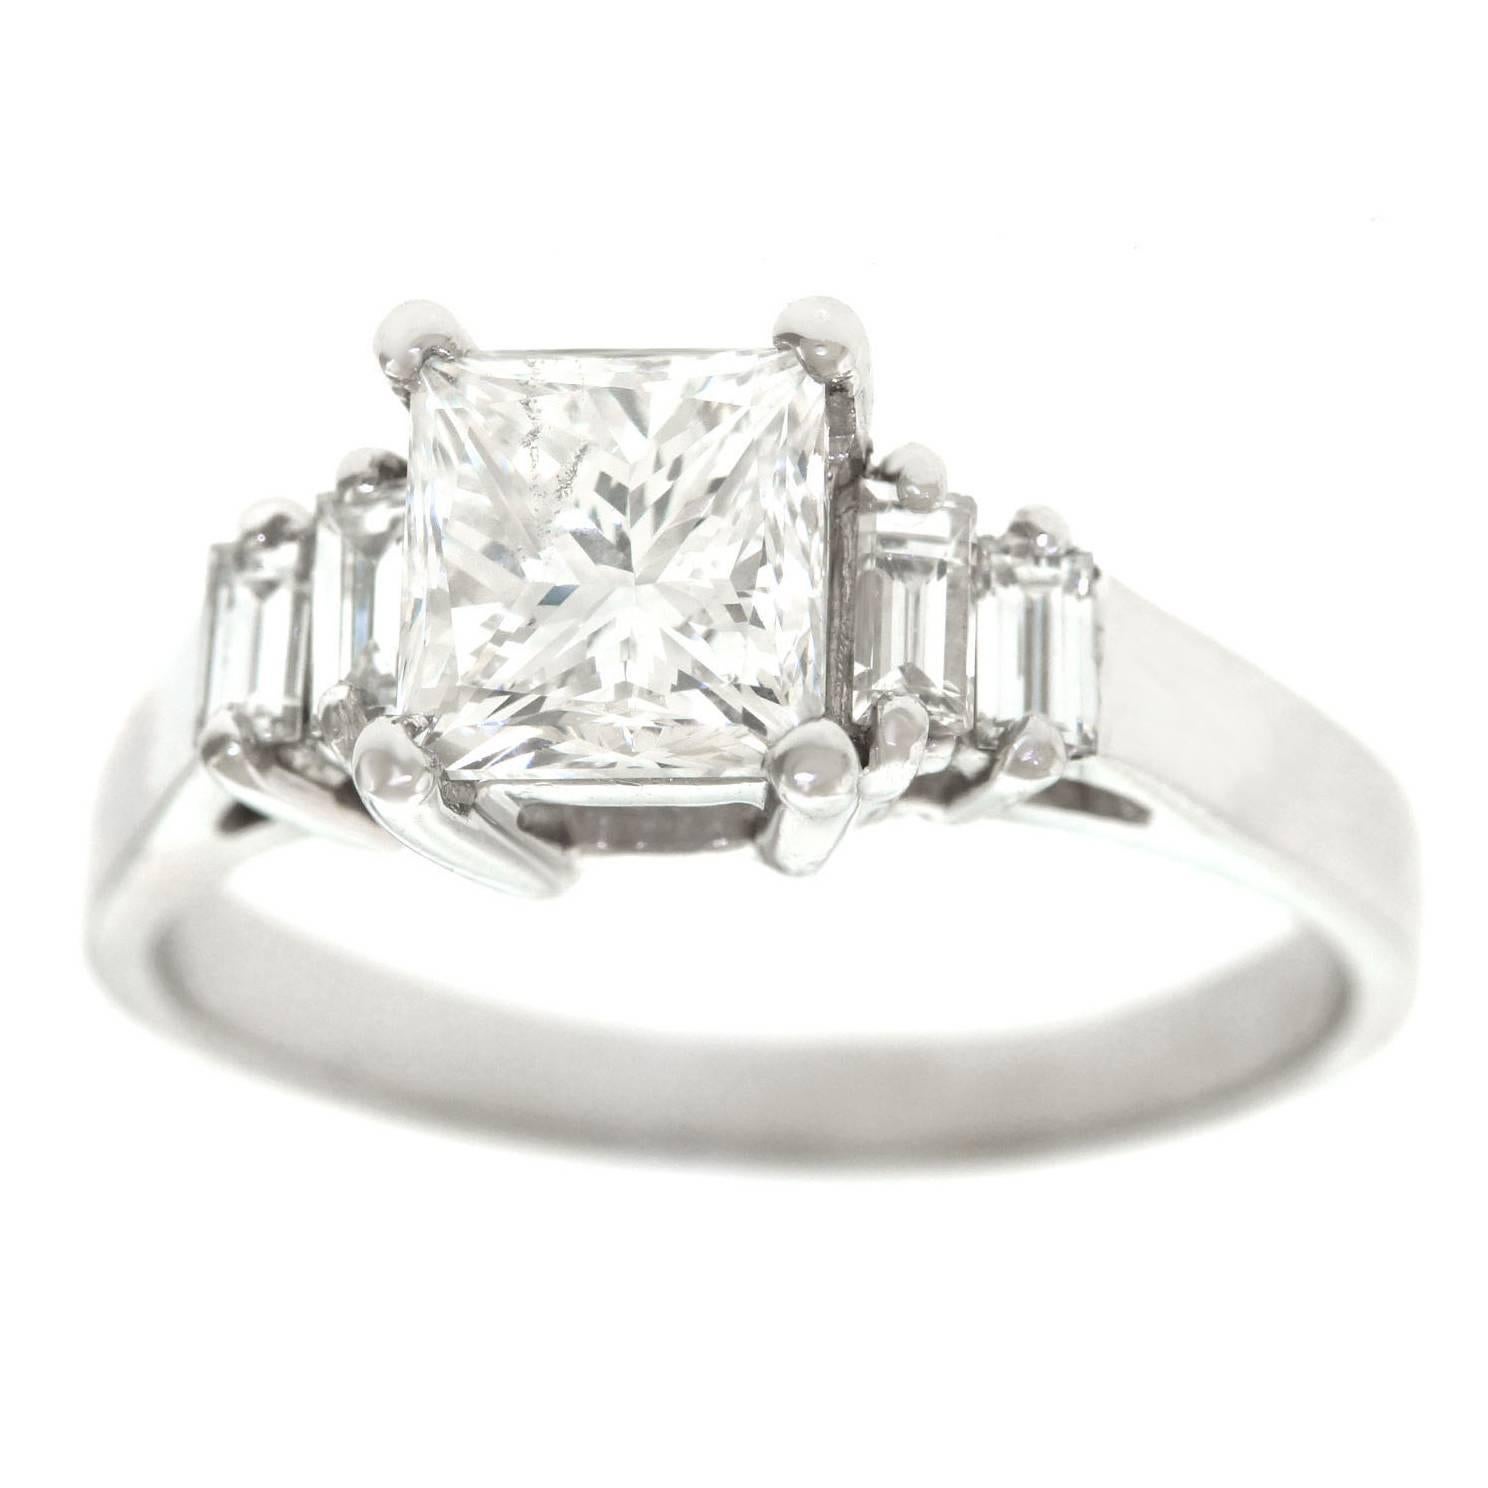 Circa 1990s, platinum, American.  A modern classic, this five-stone engagement ring is set with a brilliant white 1.51 carat princess-cut diamond (GIA report, G color, SI2 clarity) surrounded by .30 carat of baguette diamonds (H-G color, SI1